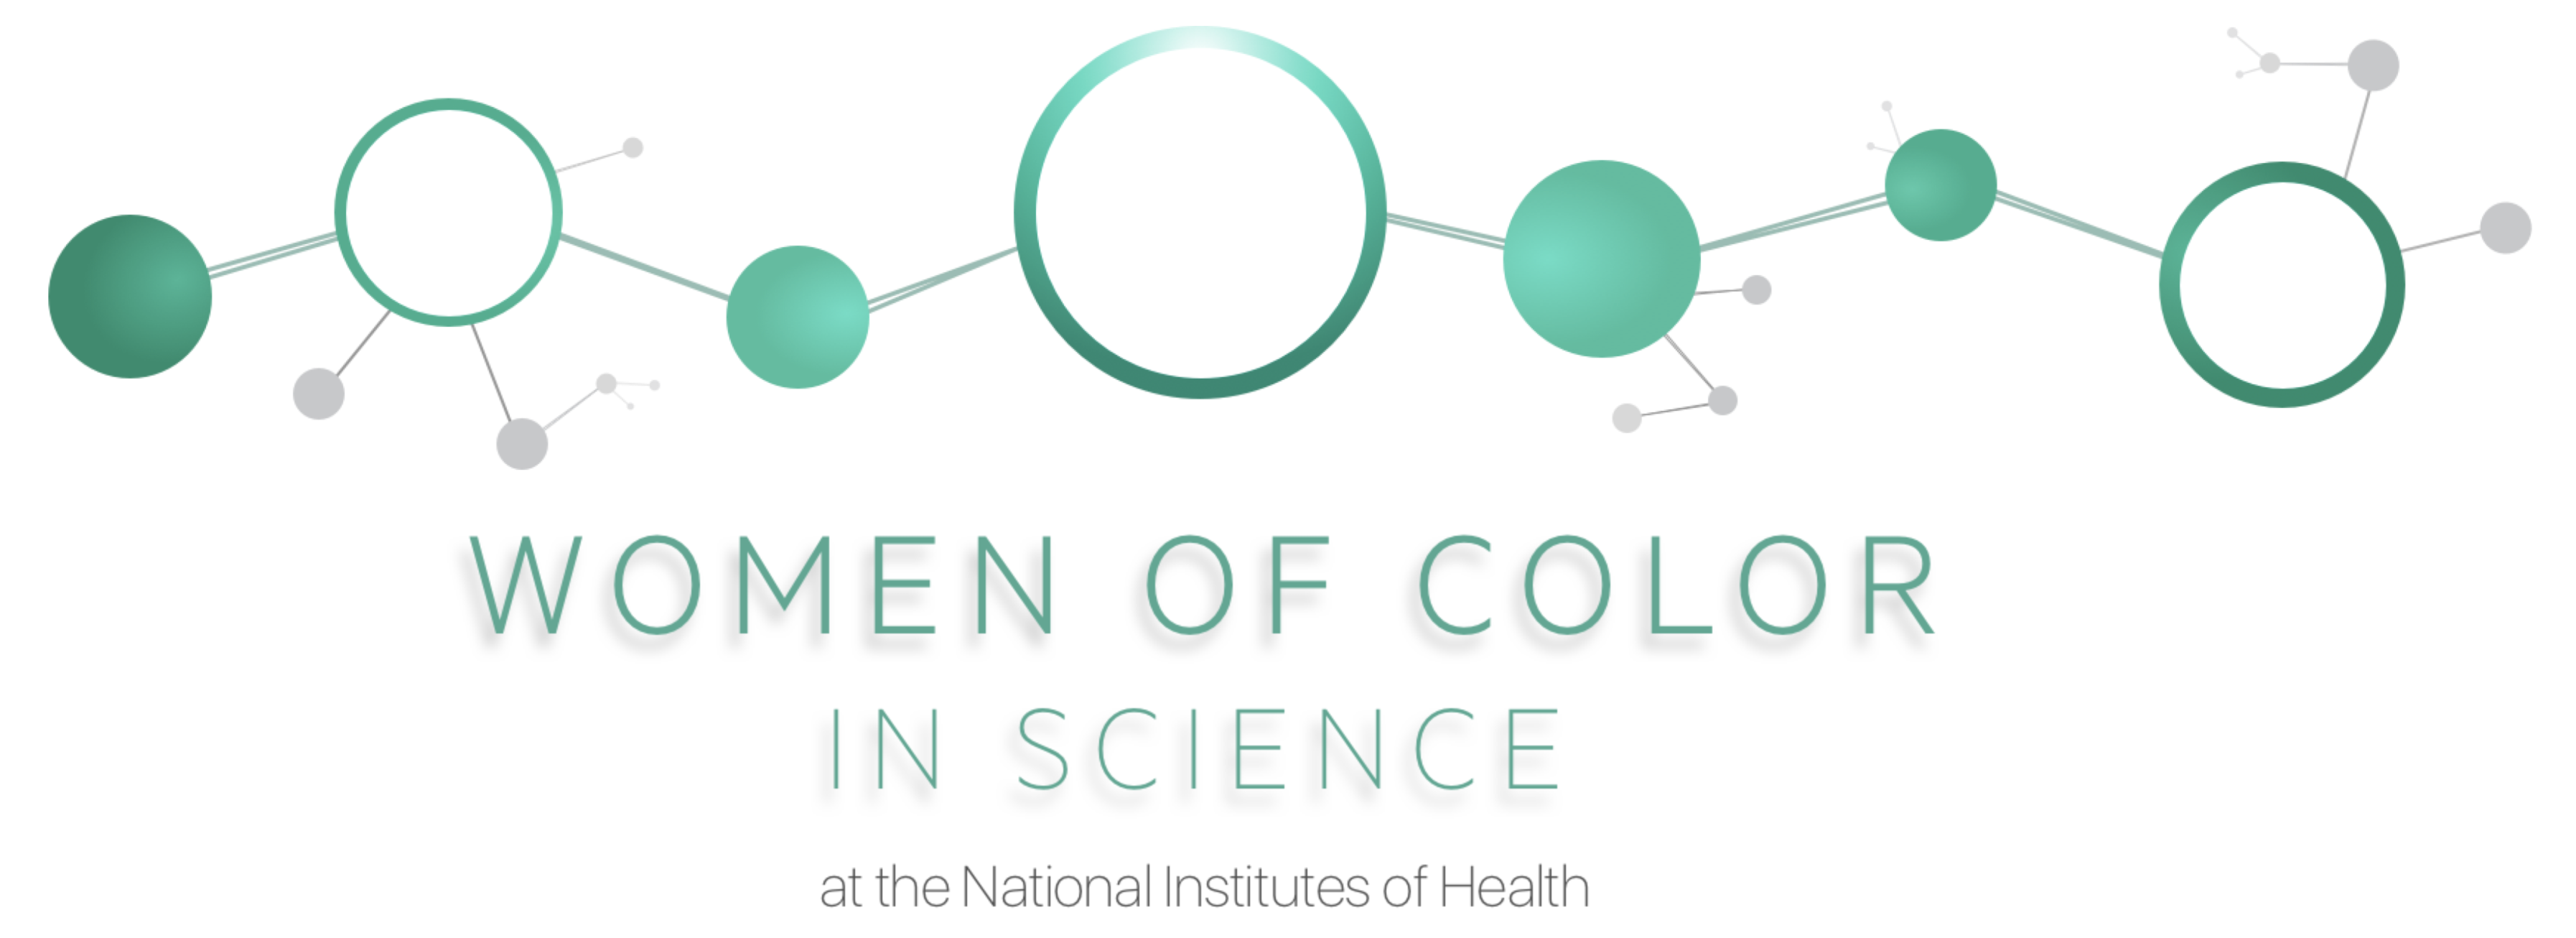 women-of-color-in-science.png